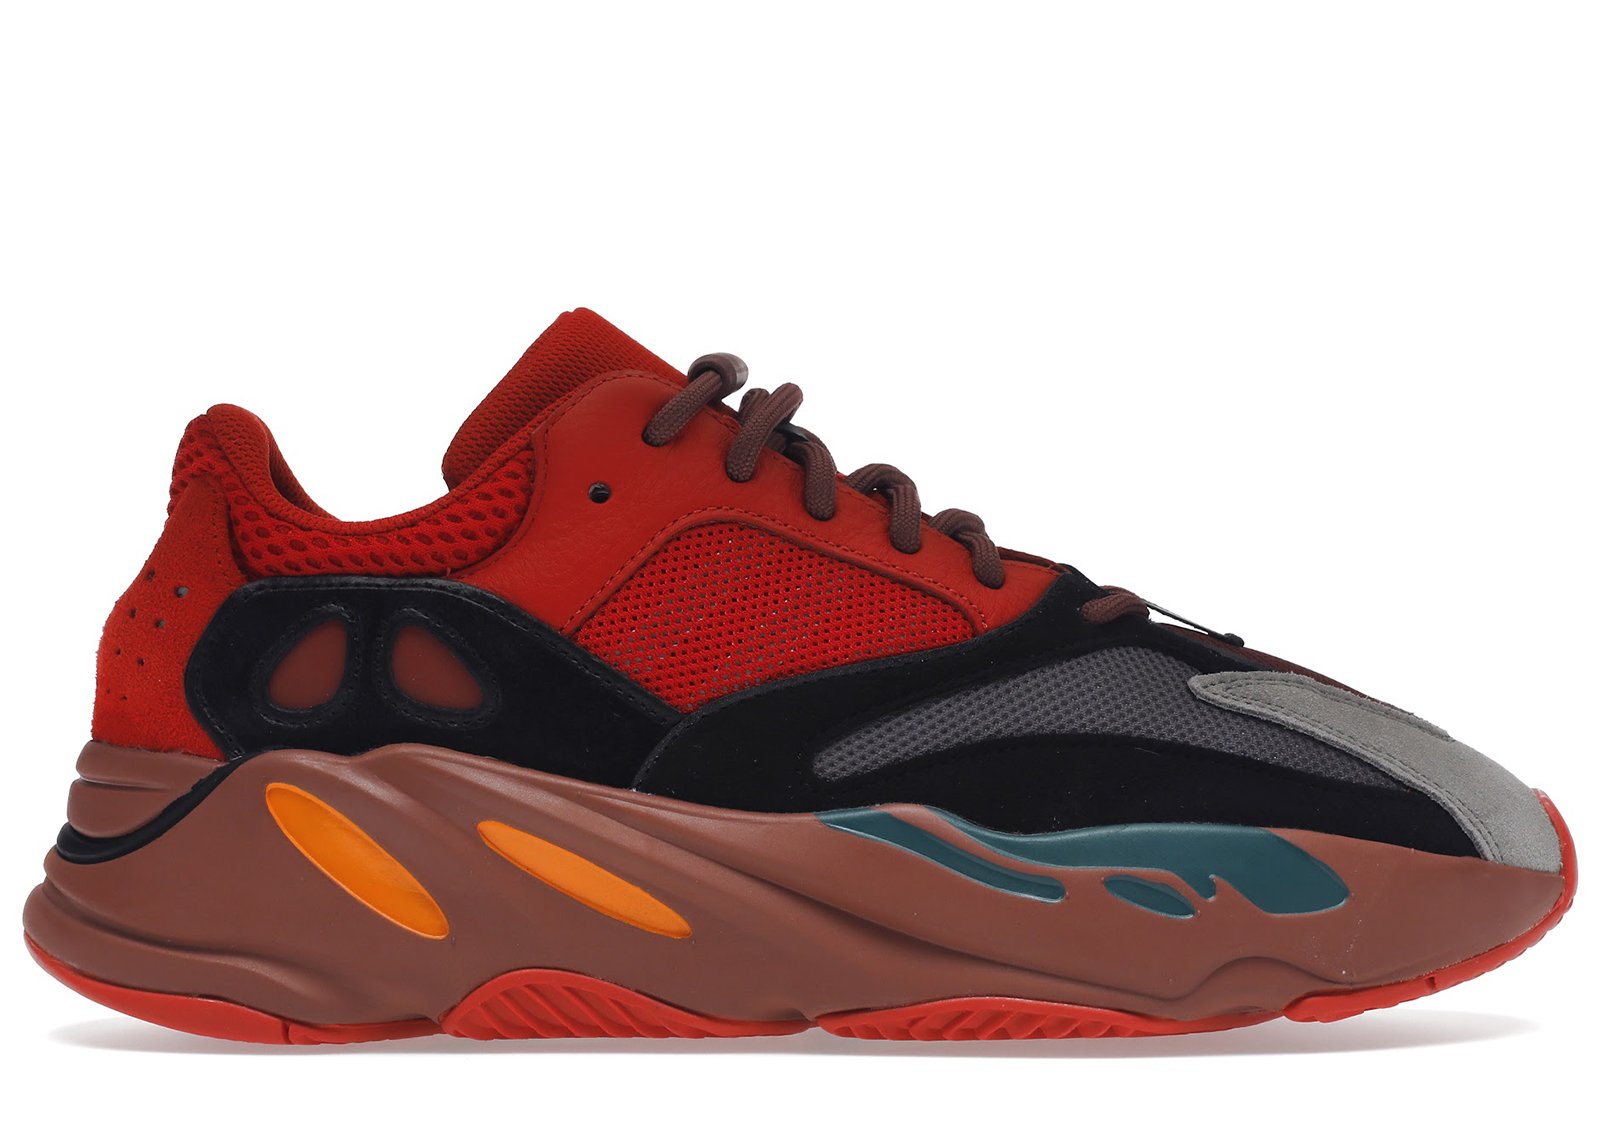 adidas Yeezy Boost 700 Hi-Res Red sneakers